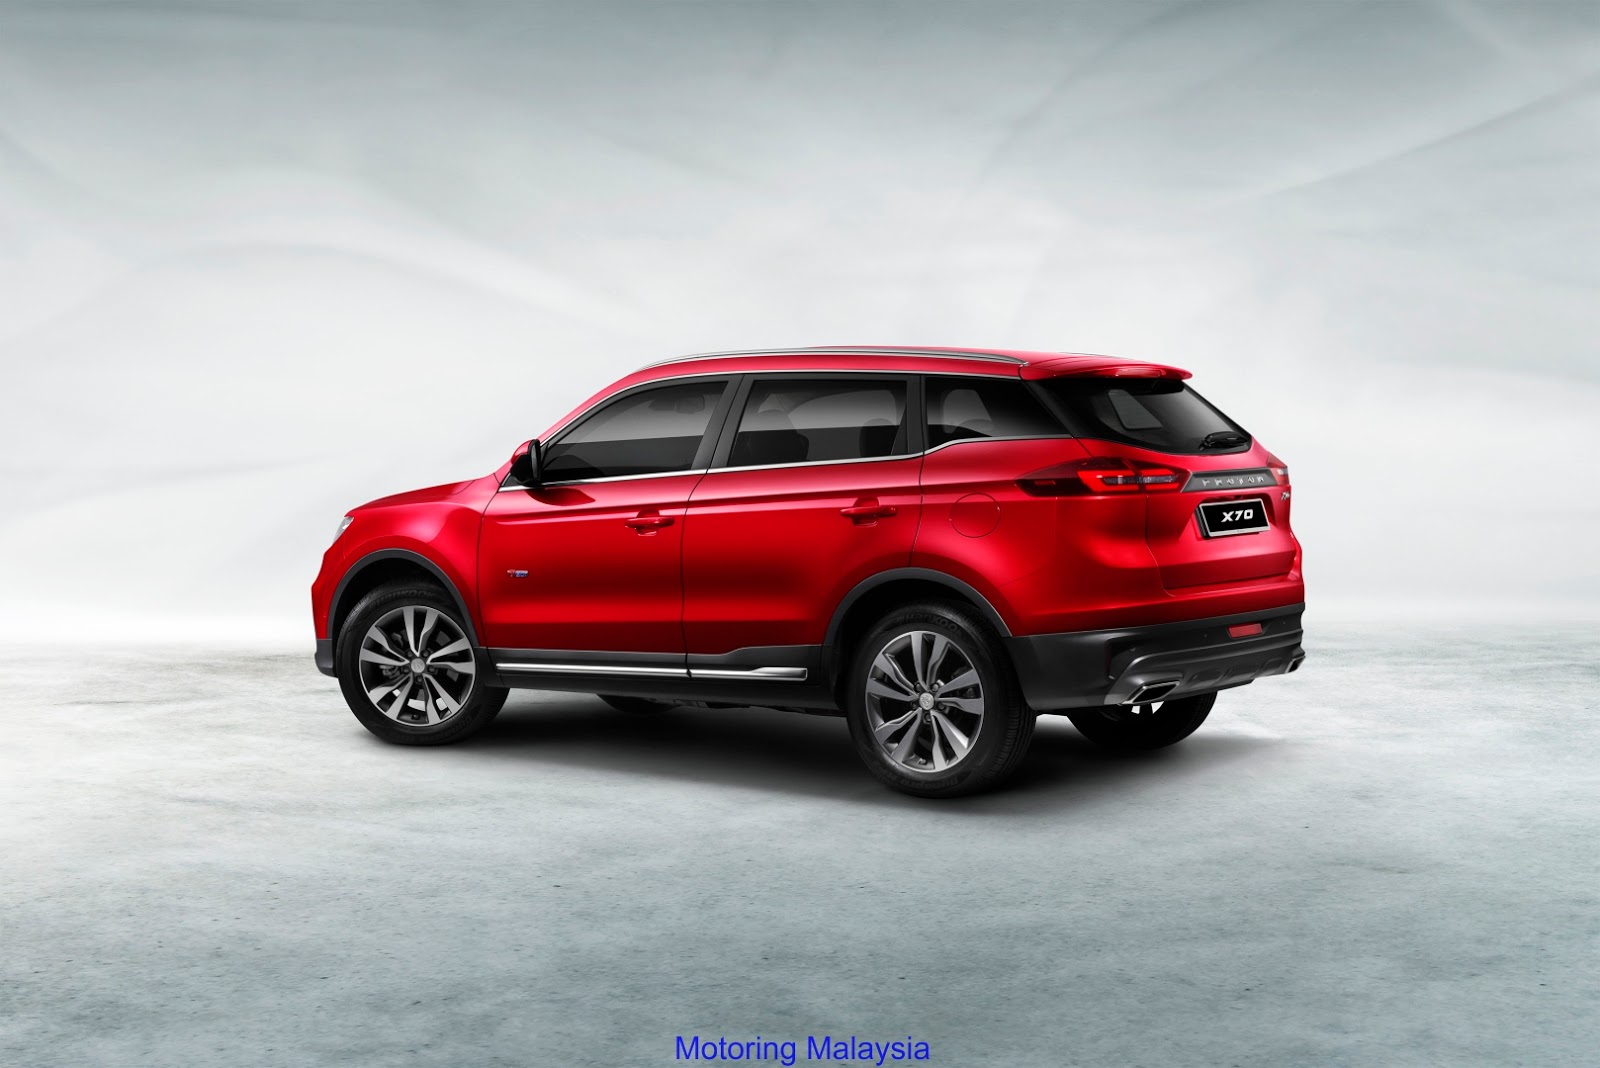 Motoring Malaysia Proton Previews Their Latest Car The Proton X70 Suv Bookings Start From The 8th September 2018 Onwards Price Not Announced For The Moment